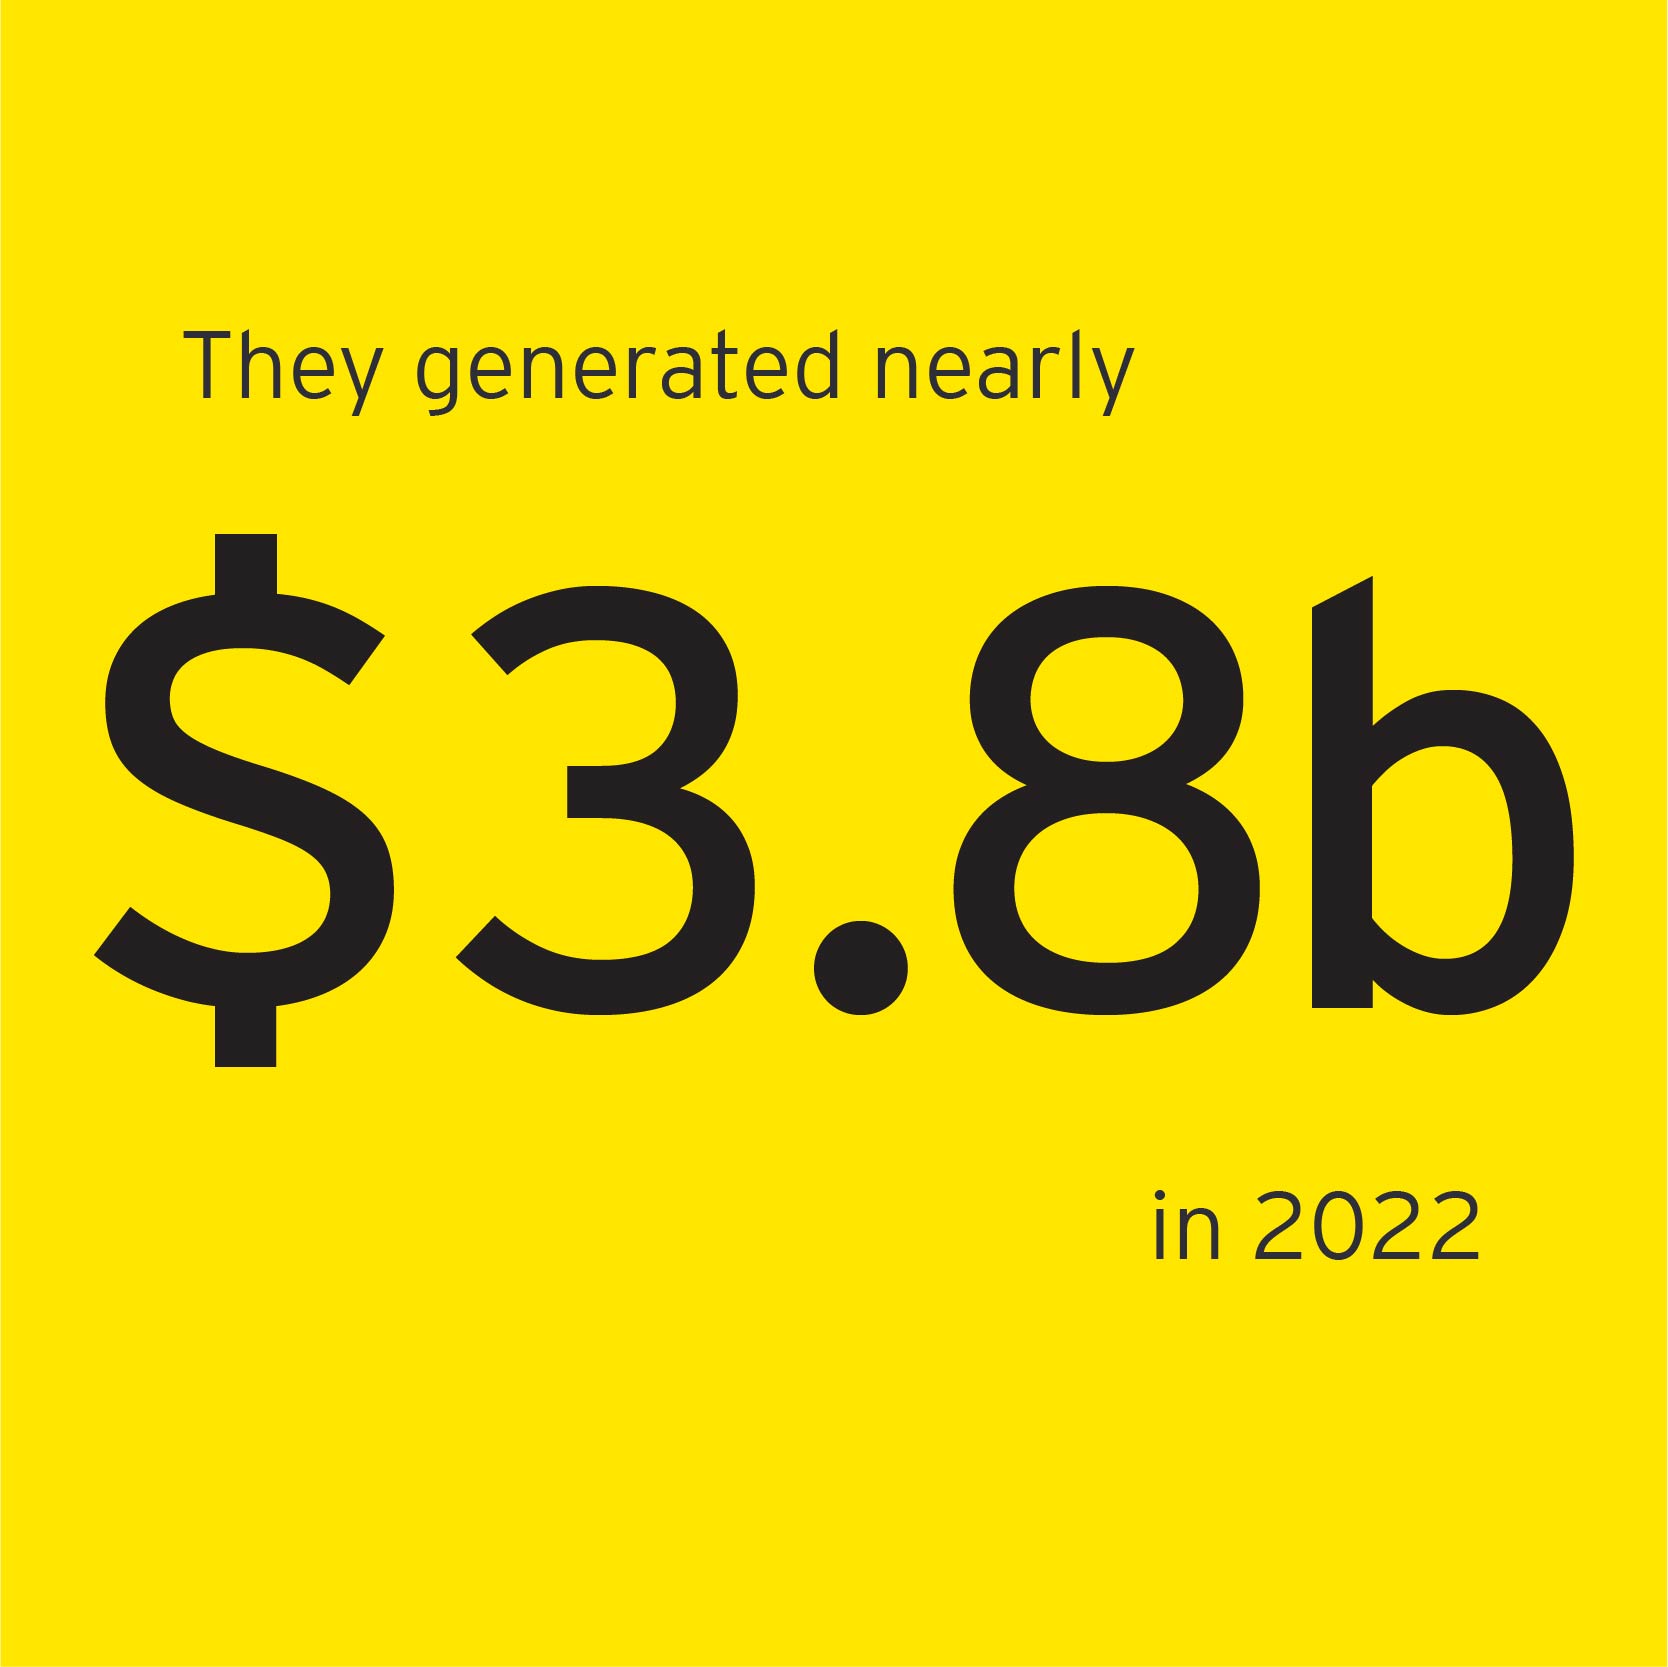 Nearly $3.8b in revenue generated by EOY Mid-Atlantic finalists in 2022